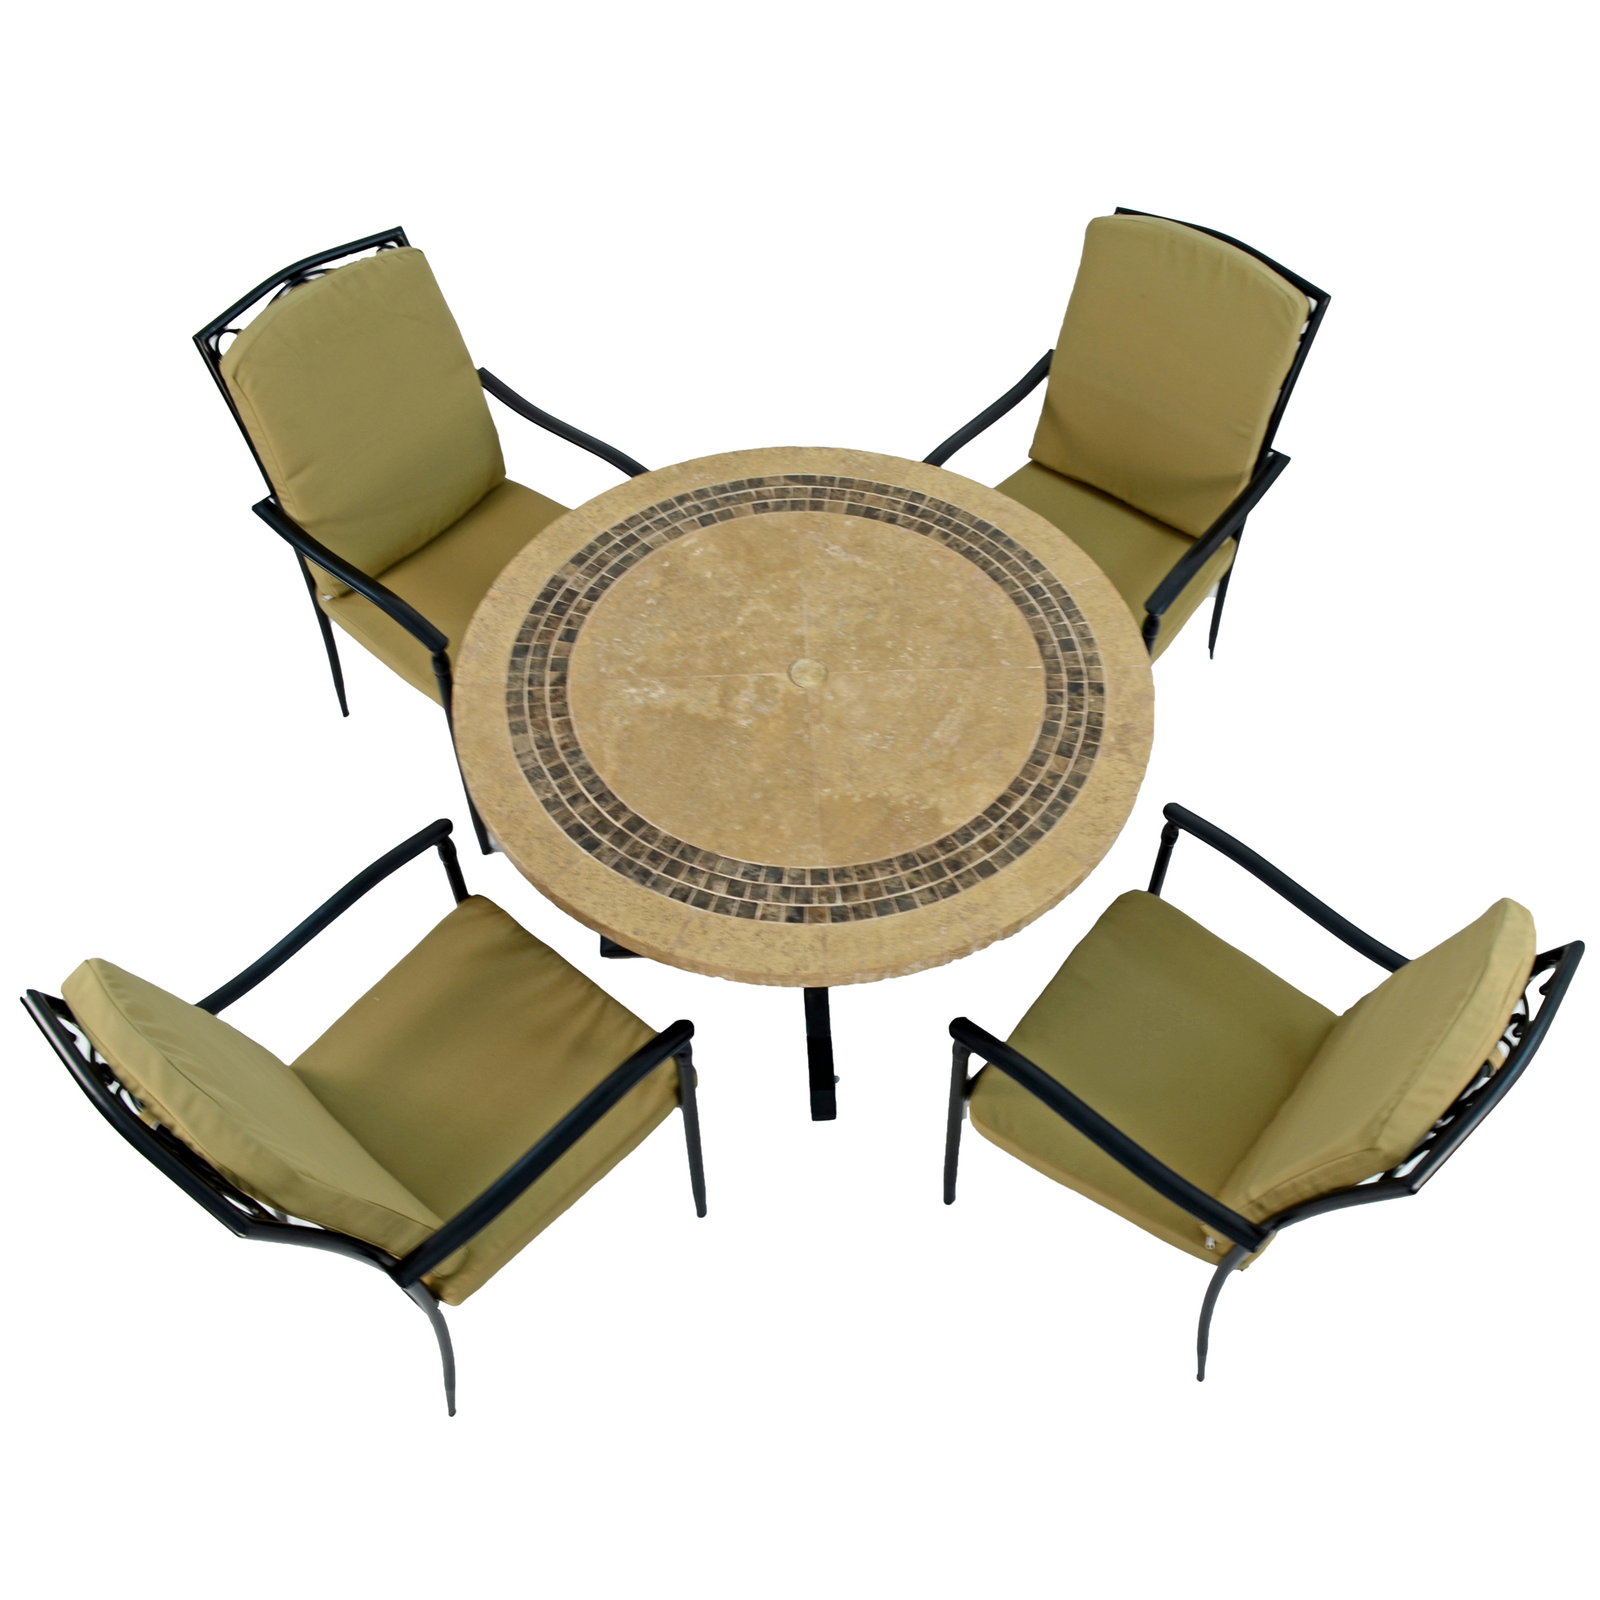 Byron Manor Vermont Garden Dining Table With 4 Ascot Chairs Set Dining Sets Byron Manor   